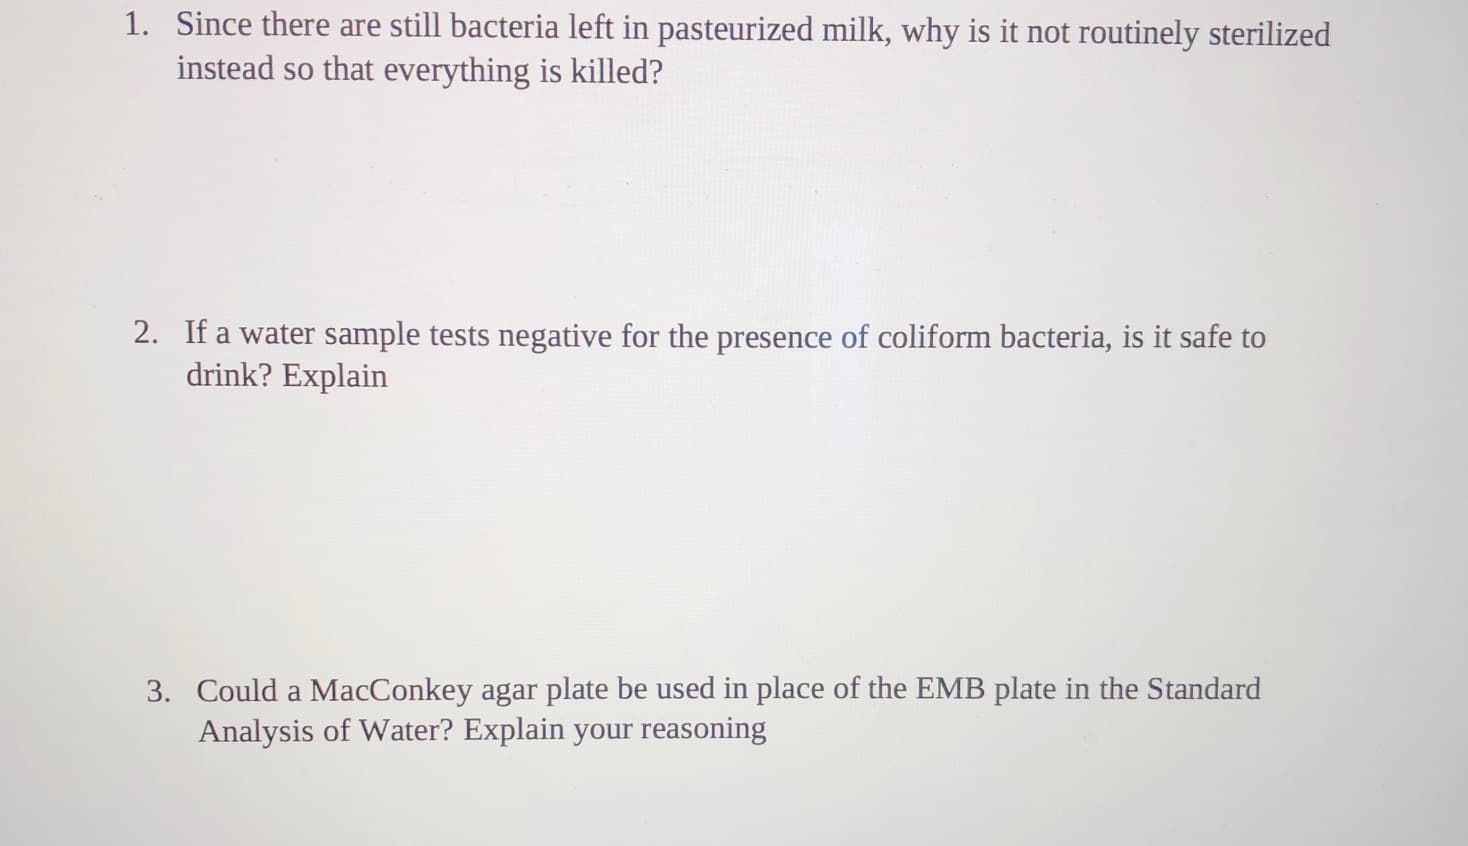 Since there are still bacteria left in pasteurized milk, why is it not routinely sterilized
instead so that everything is killed?
